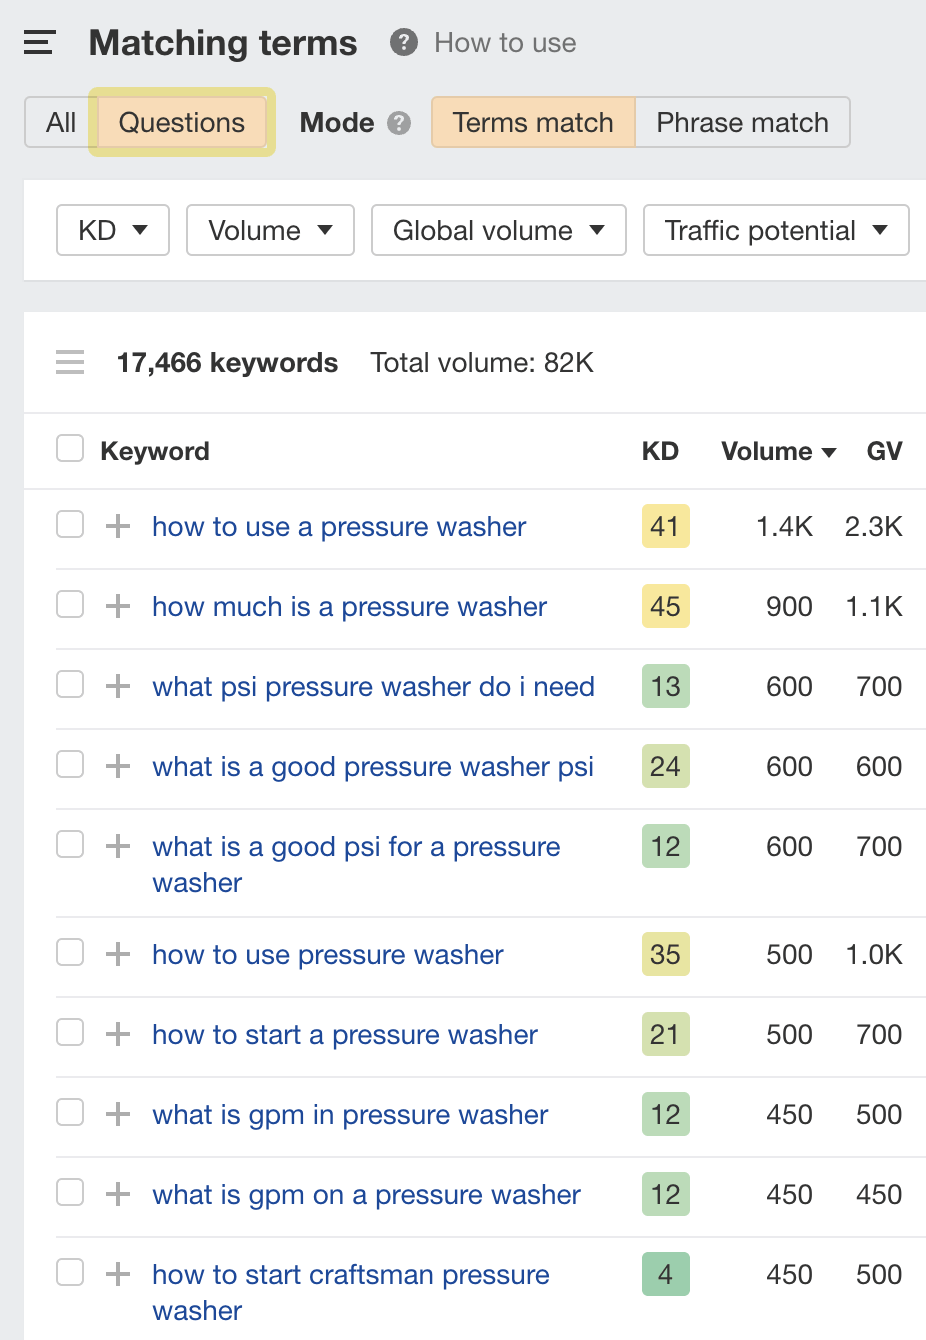 Matching terms report for "pressure washer" filtered by Questions, via Ahrefs' Keywords Explorer
